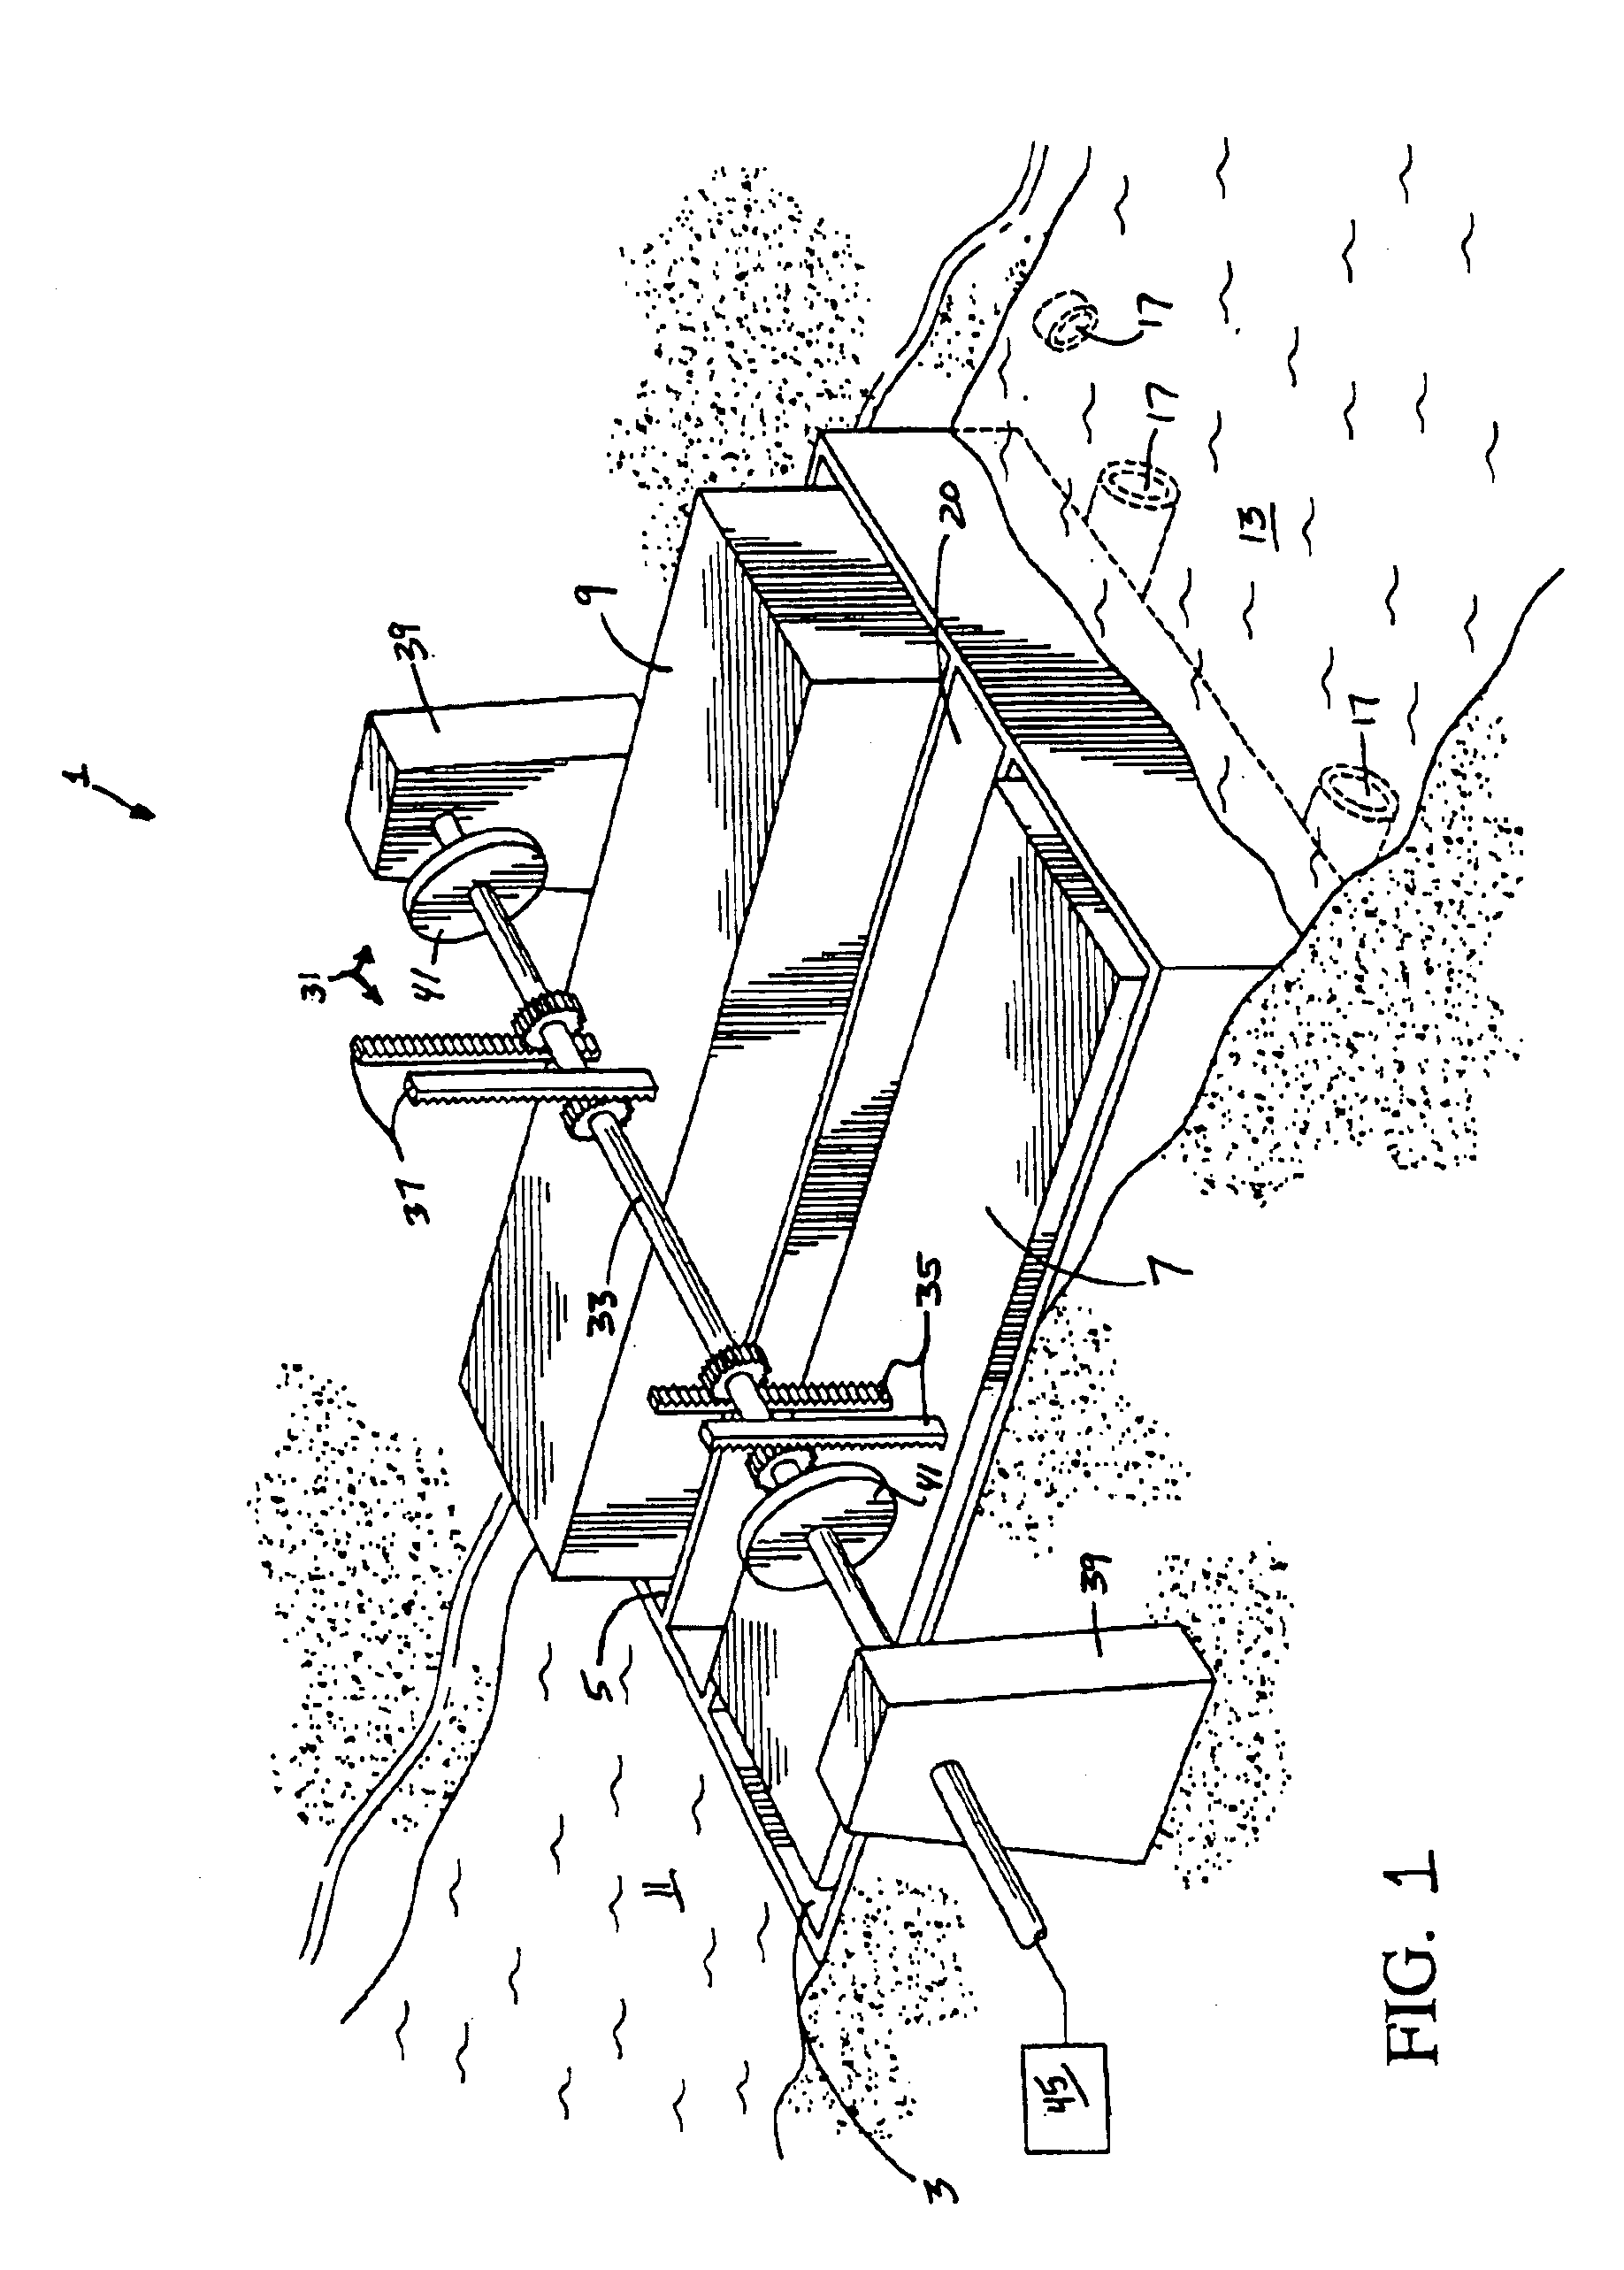 Hydropower generation apparatus and method